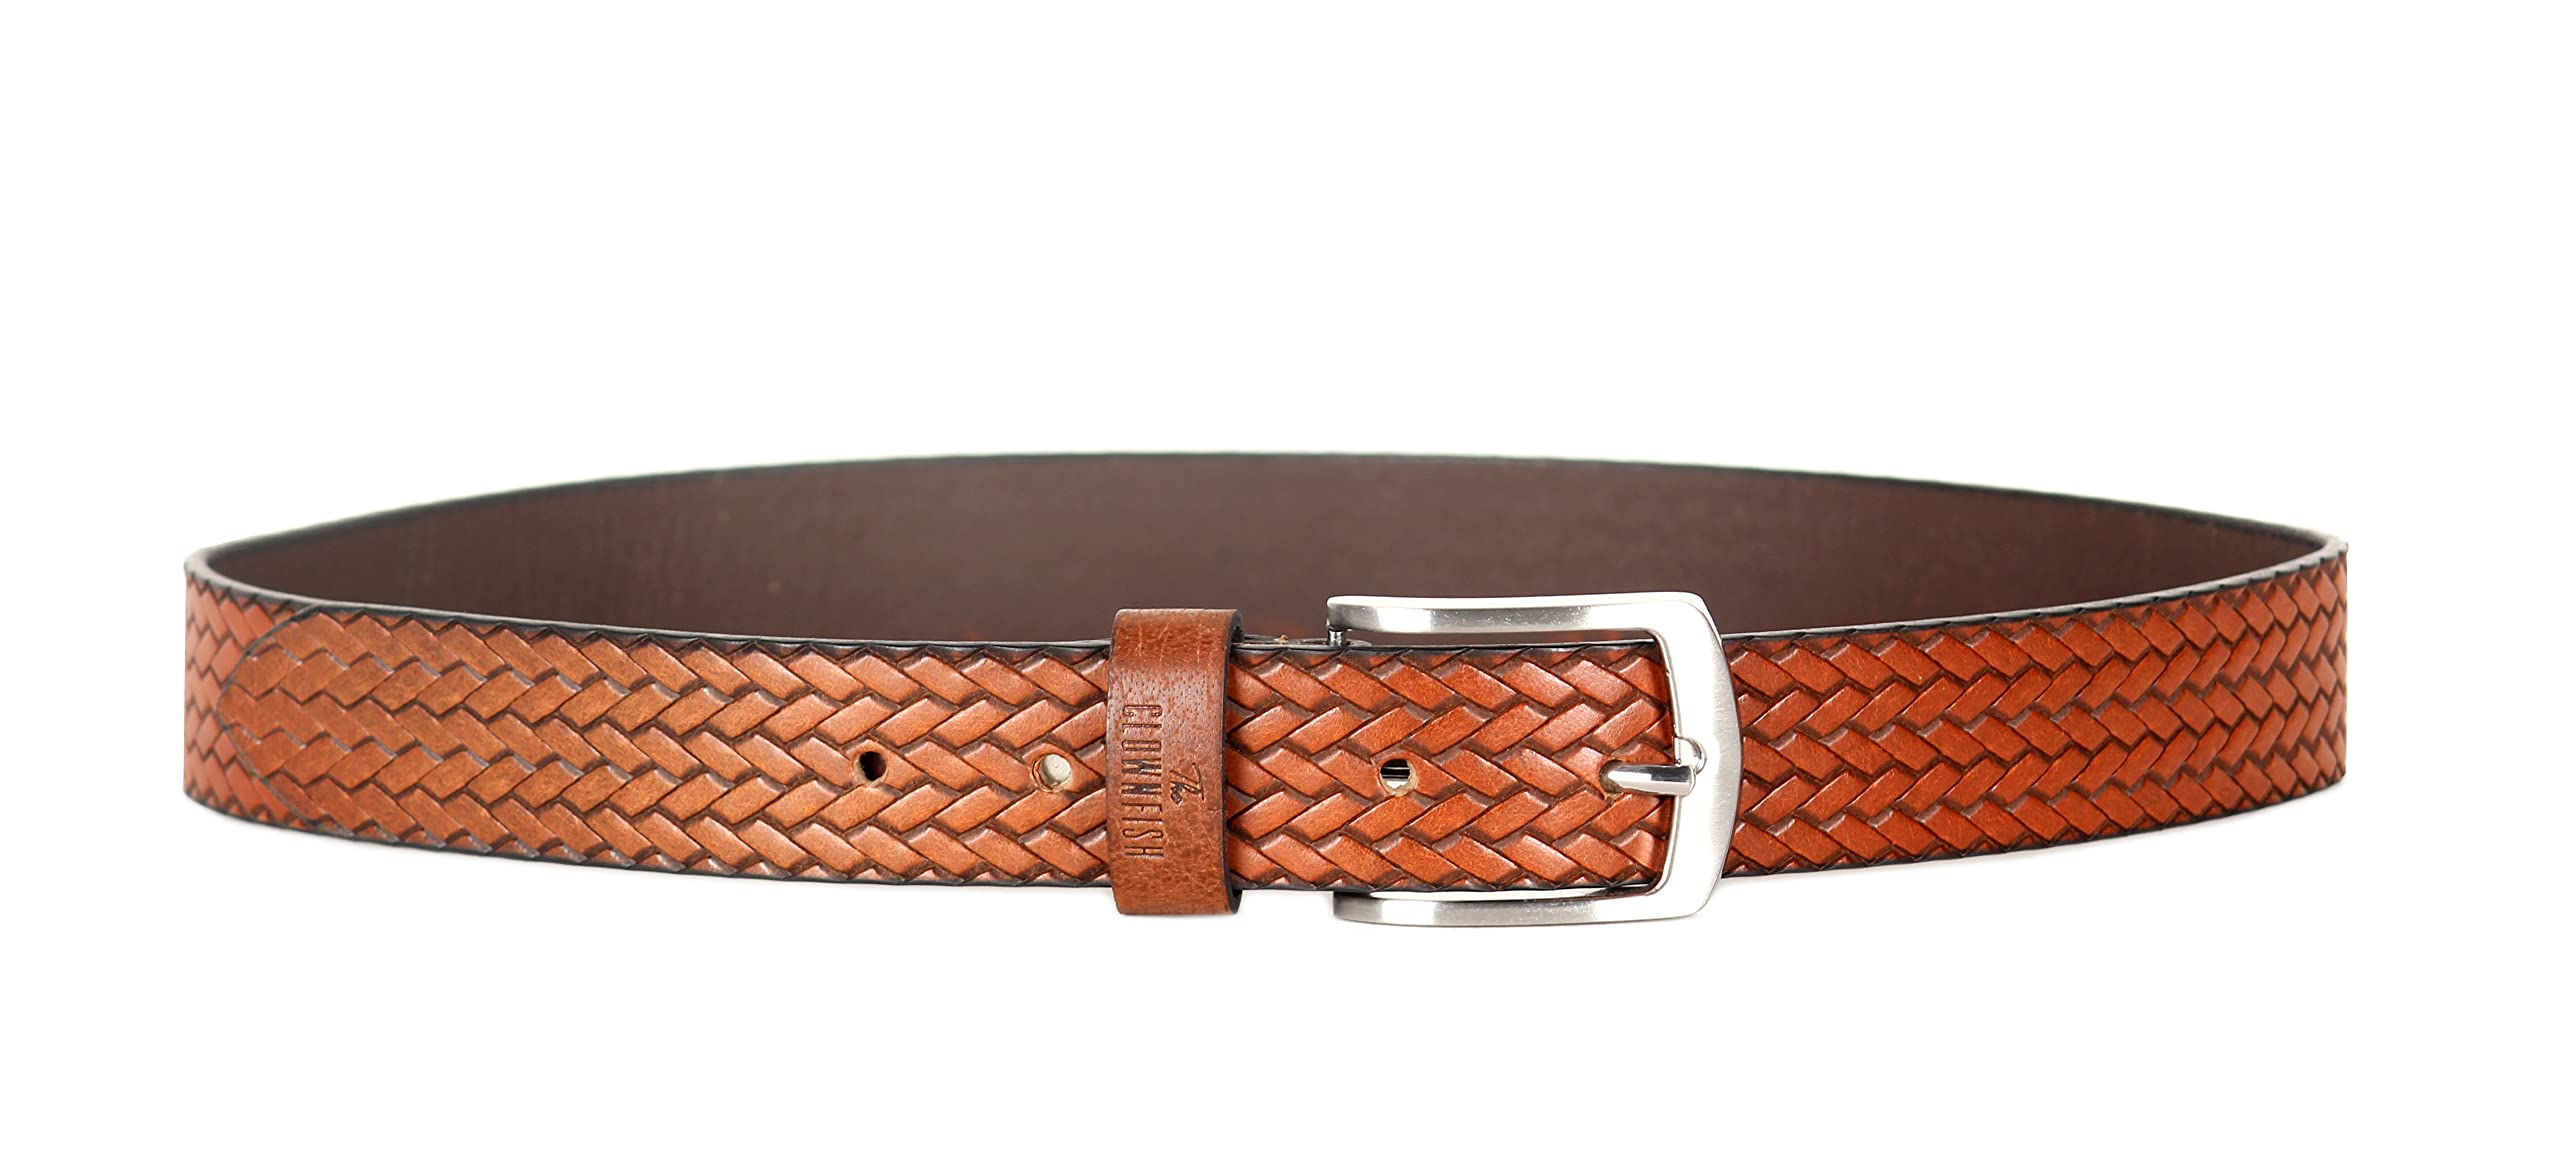 THE CLOWNFISH Men's Genuine Leather Belt with Textured/Embossed Design-Copper Brown (Size-40 inches)